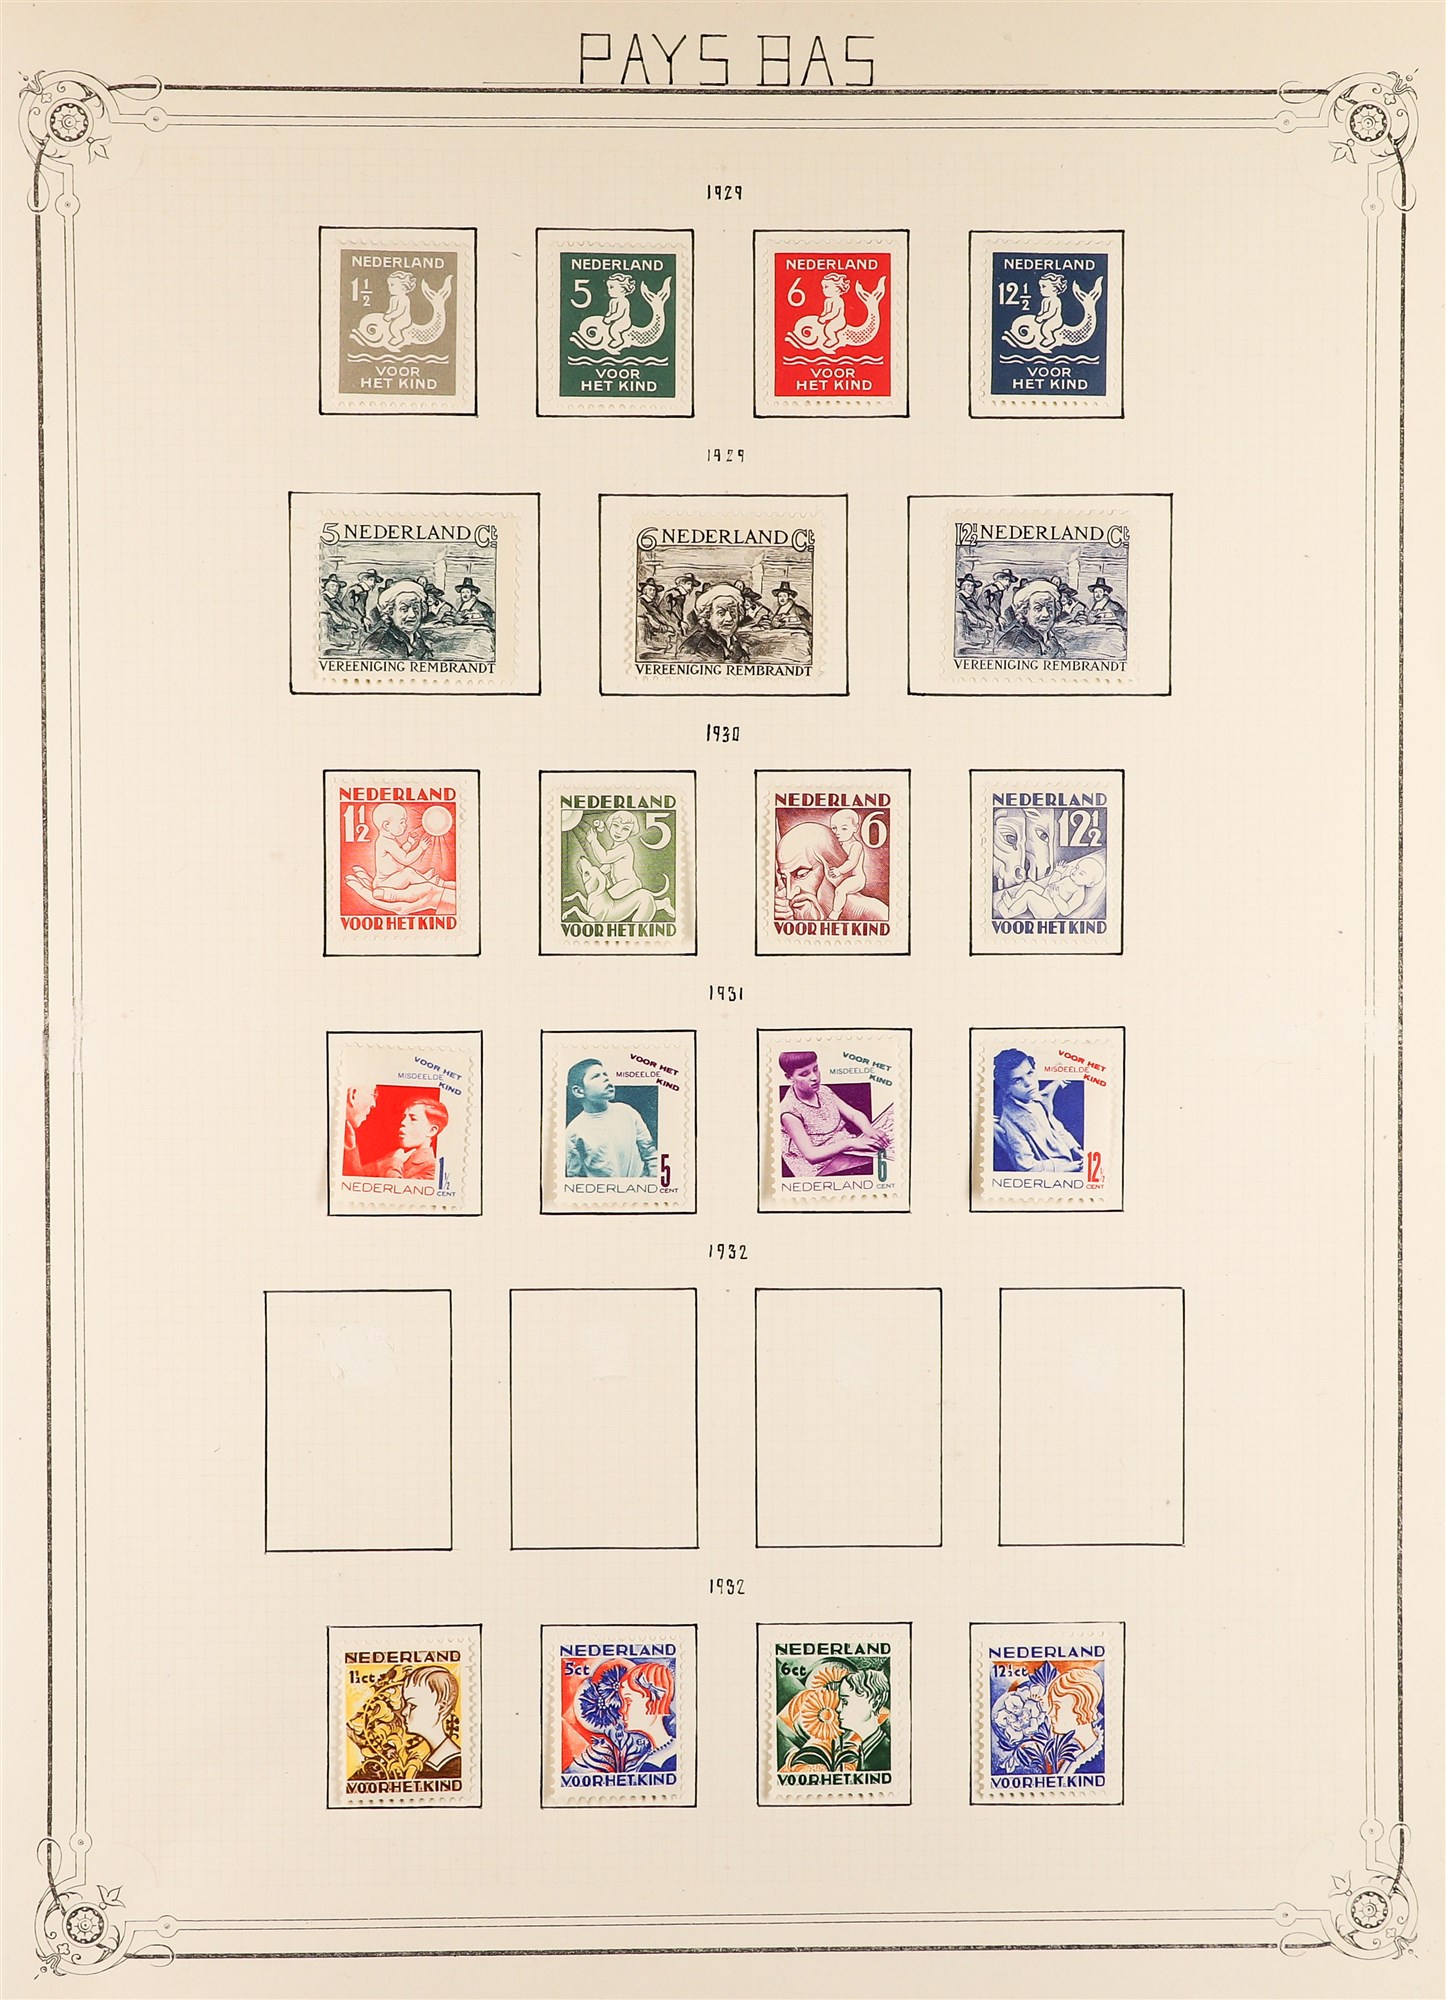 NETHERLANDS 1921 - 1939 MINT SETS collection on album pages, Michel €3000+ (110+ stamps) - Image 2 of 6